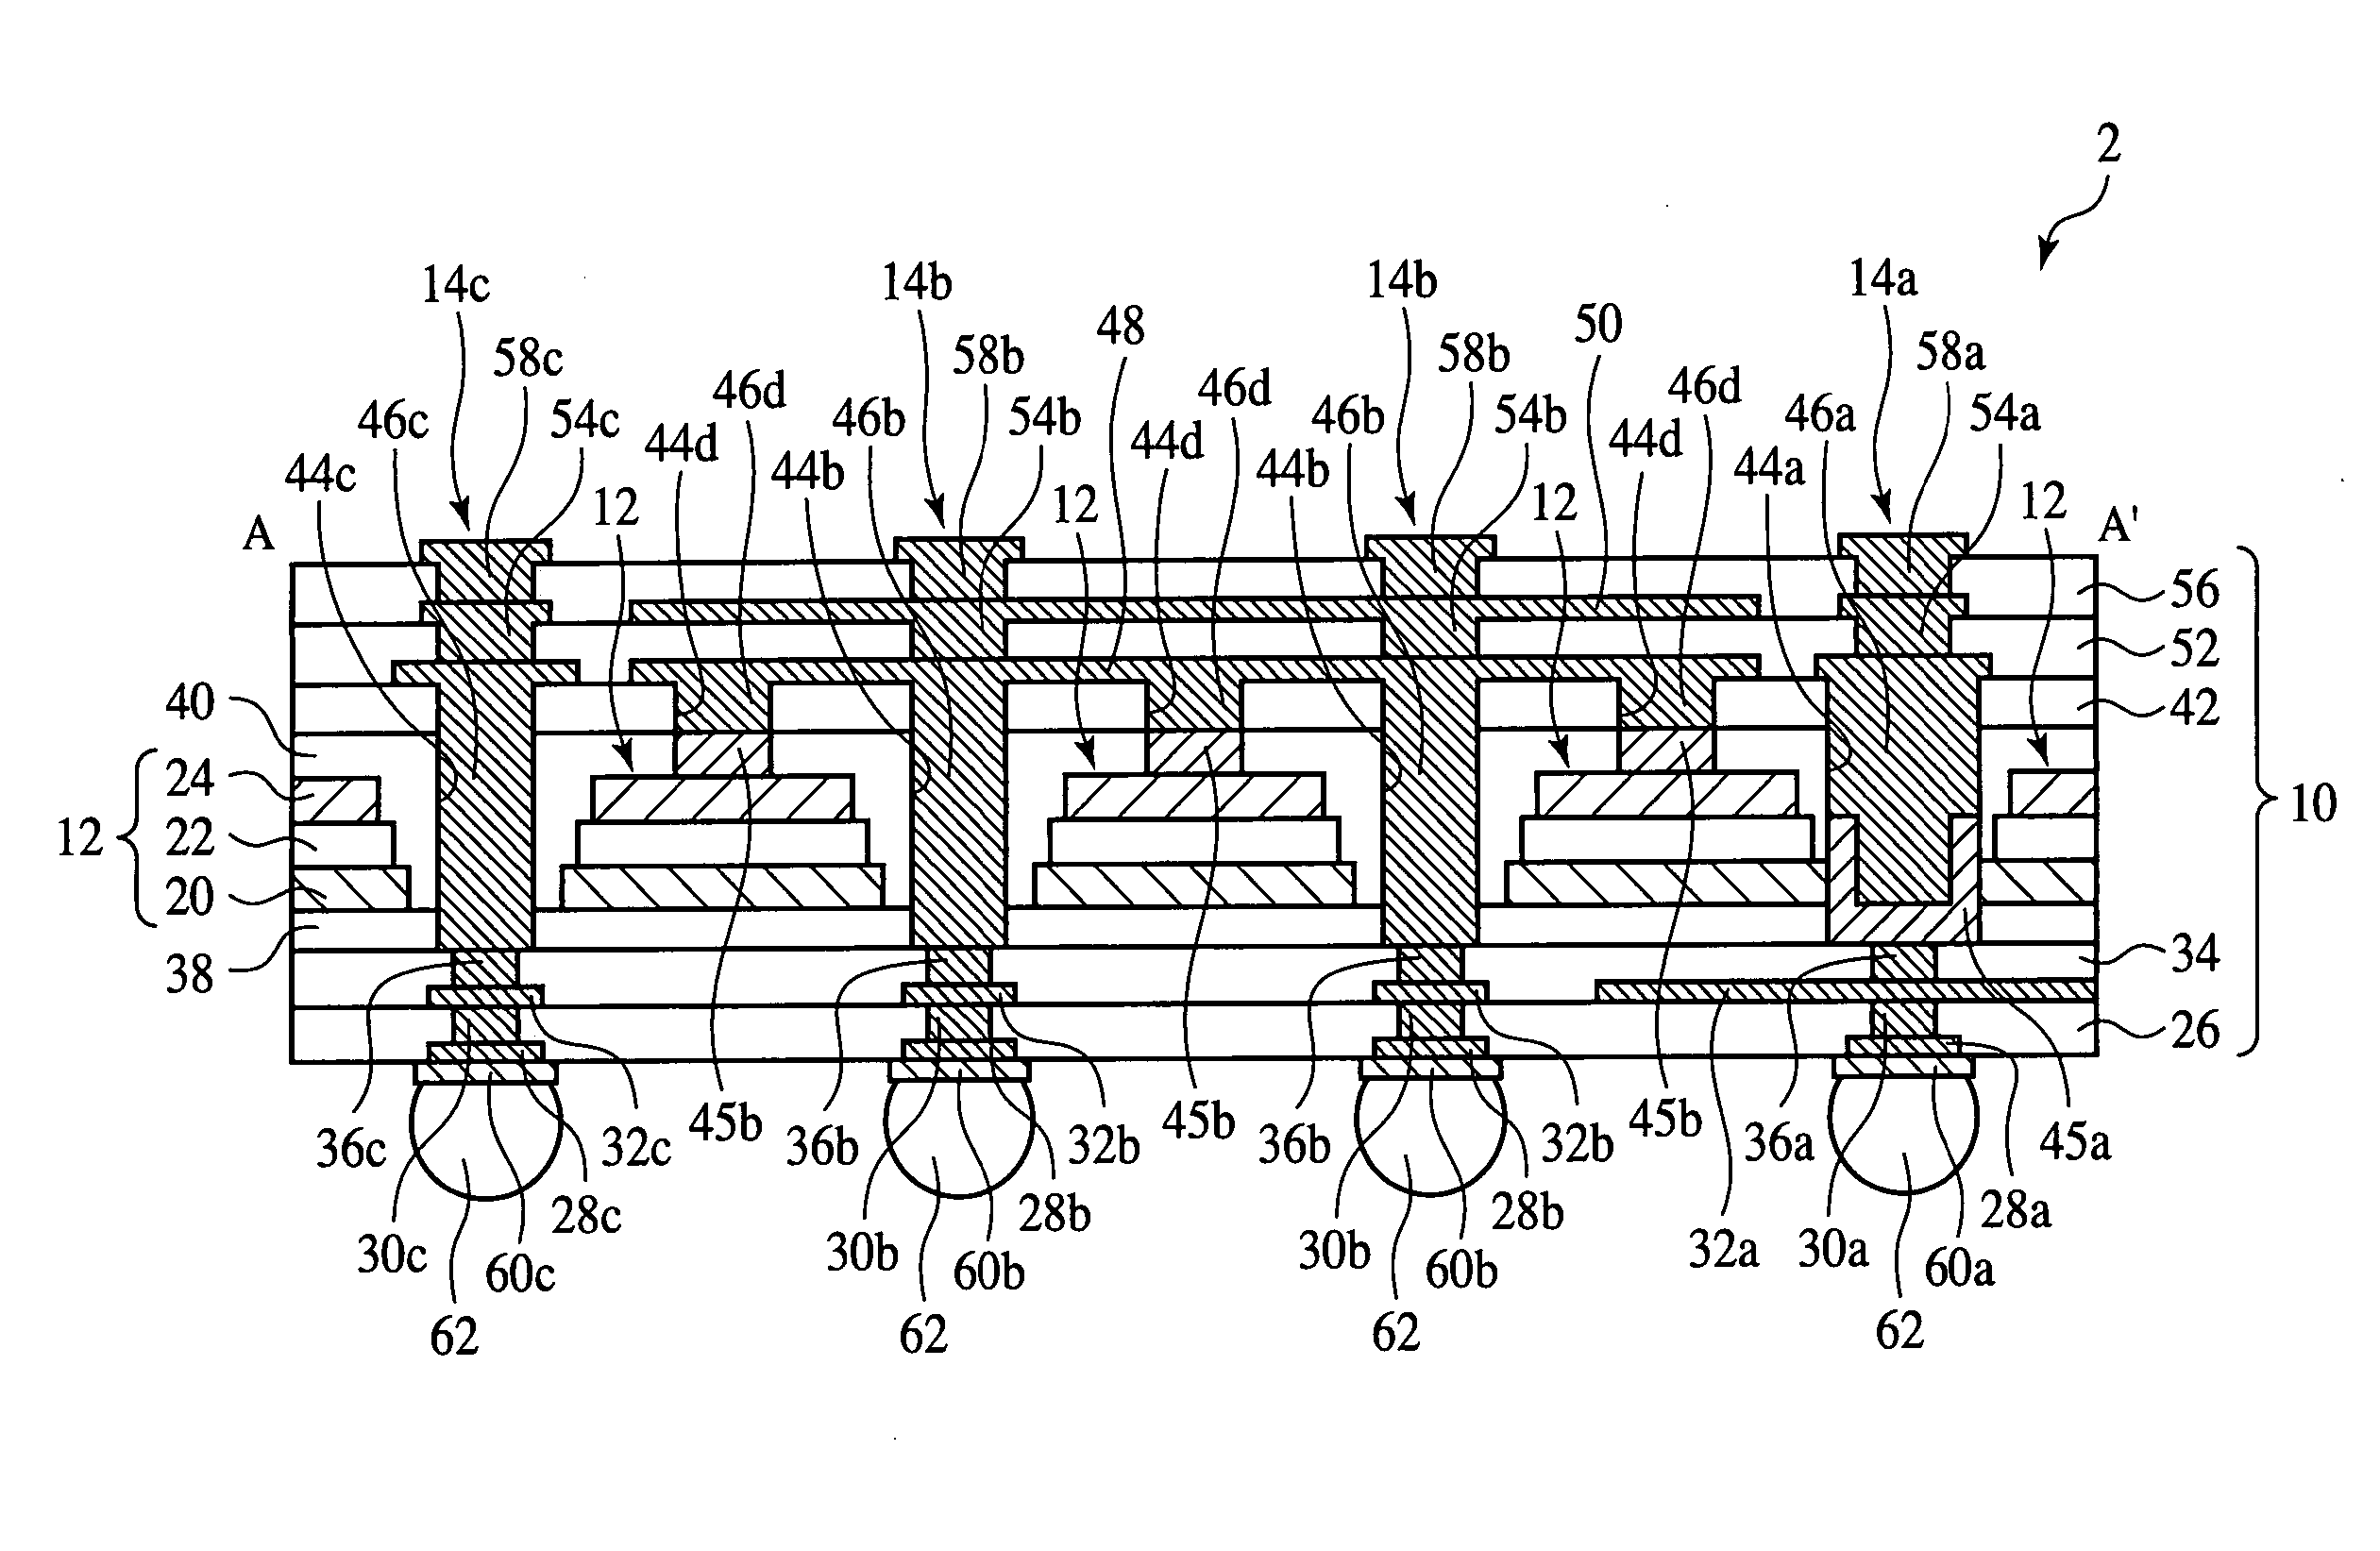 Interposer and electronic device fabrication method